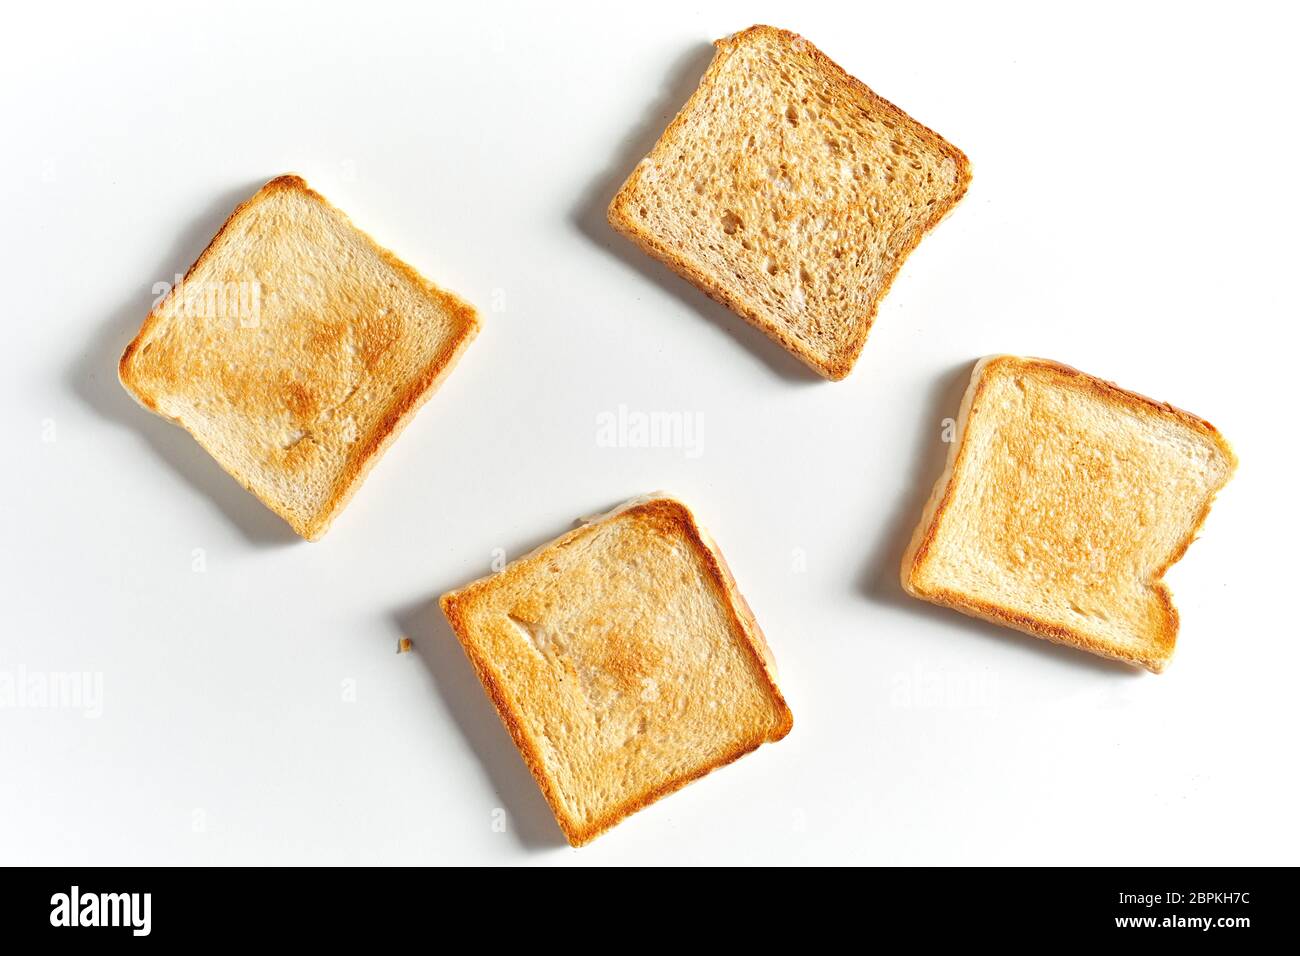 Set of four fried toast bread slices isolated on white background with shadow, viewed from above Stock Photo